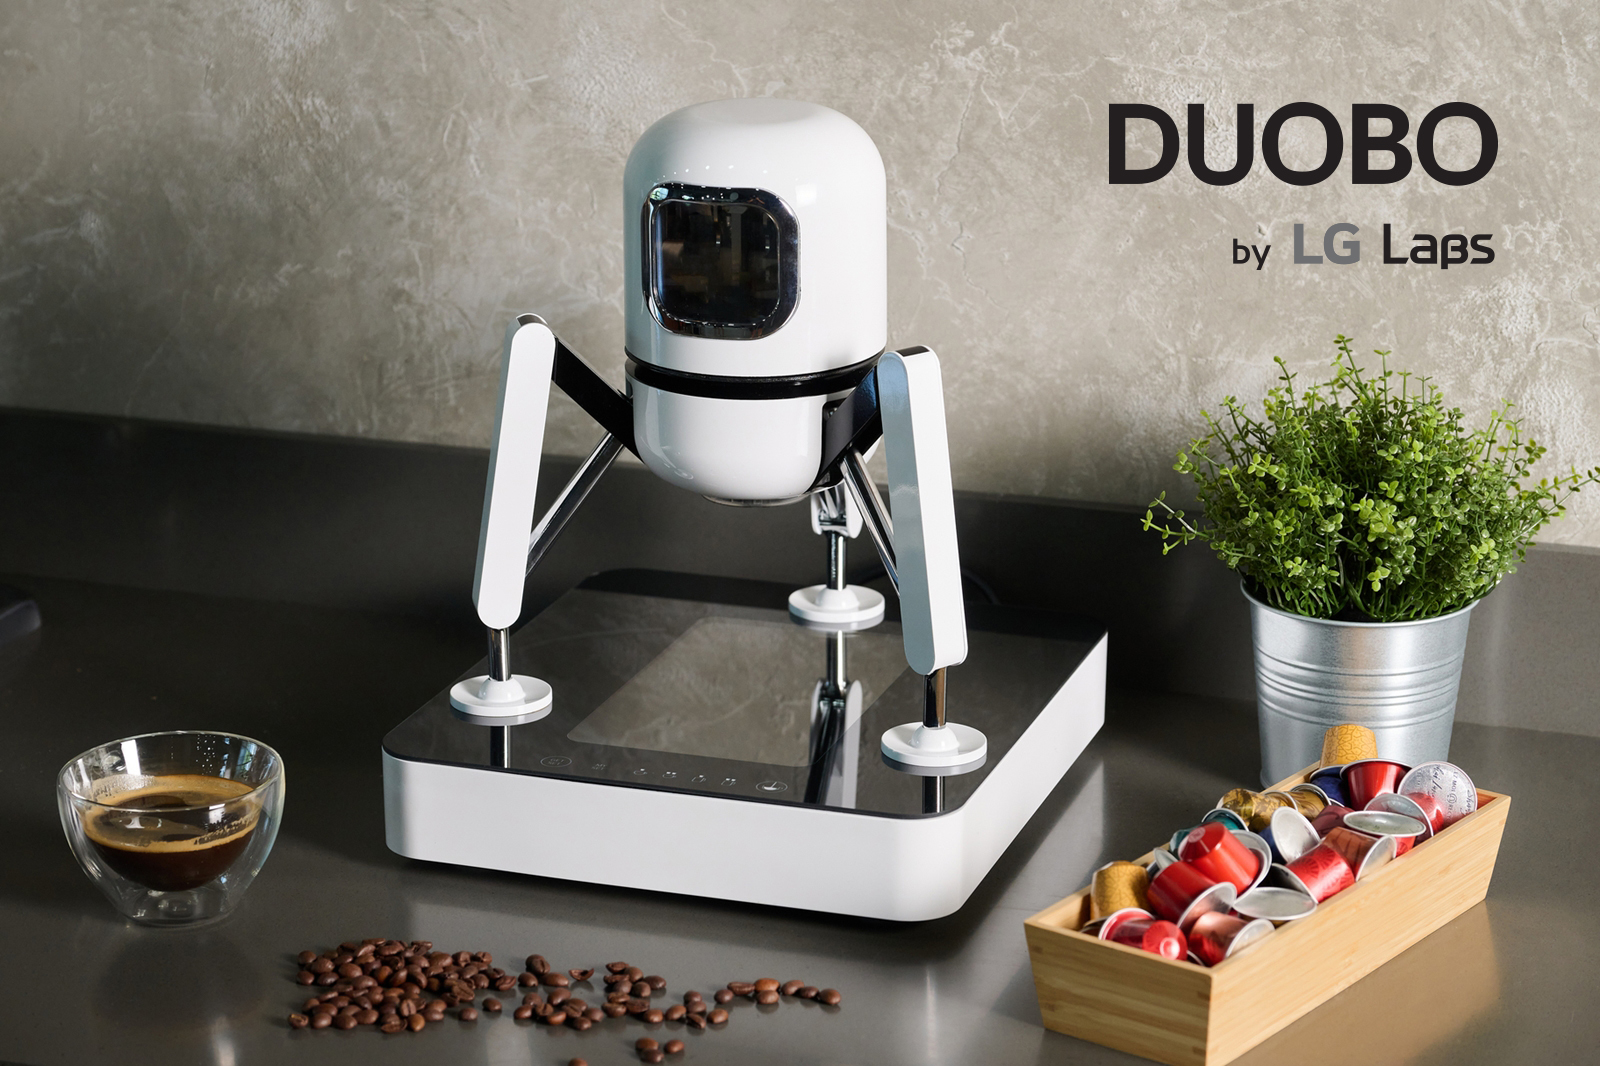 ‘Indulge in the DUOBO Coffee Experience by LG Labs’